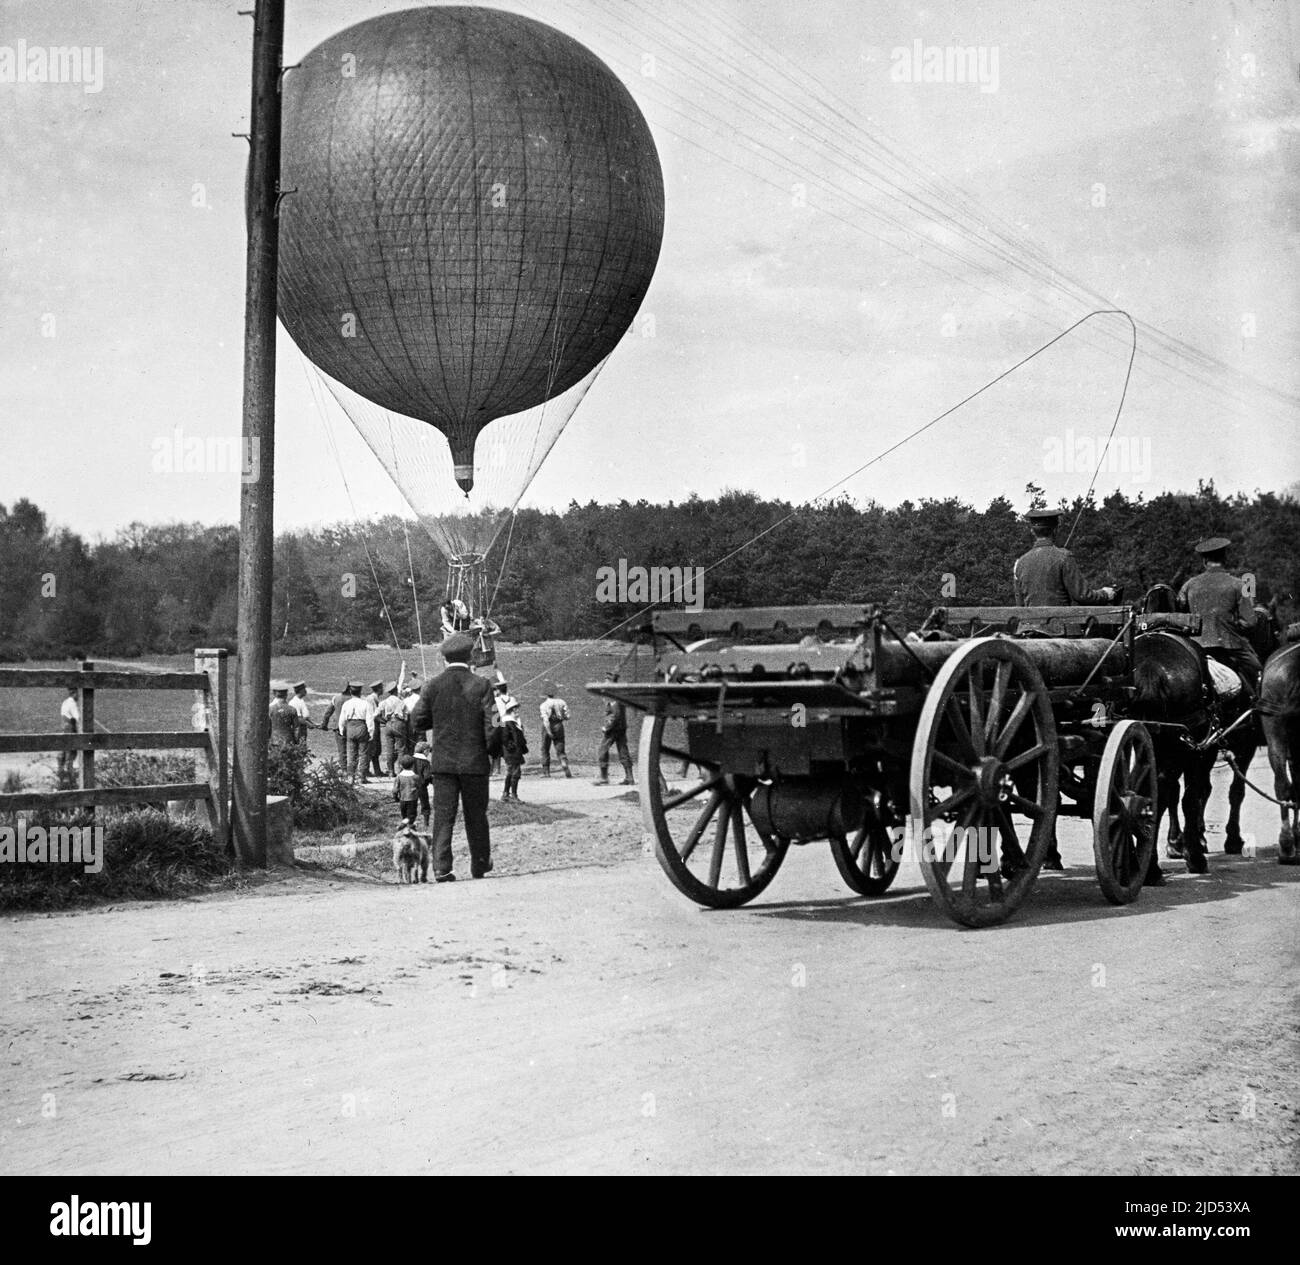 An early 20th century black and white photograph showing a Military Spherical Balloon of The British Army crossing telegraph wires at a demonstration. Stock Photo